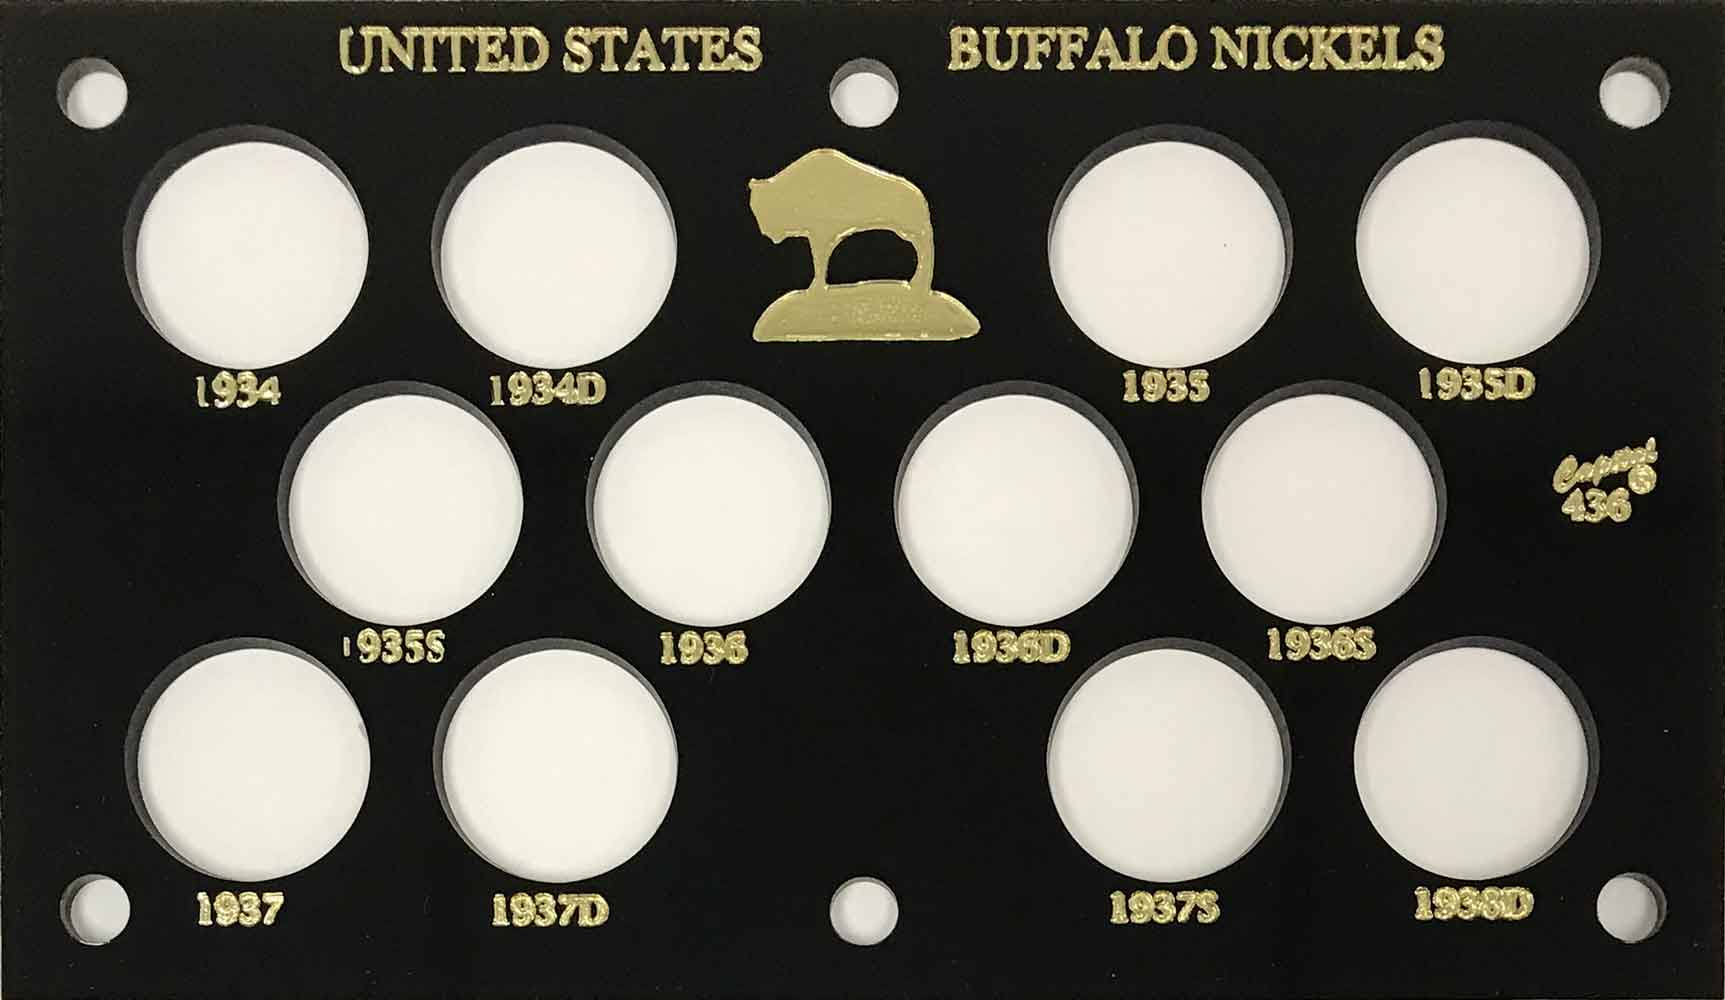 Capital Plastic Holder Case For Buffalo Nickels 12 Coins Set 1934-1938D White 